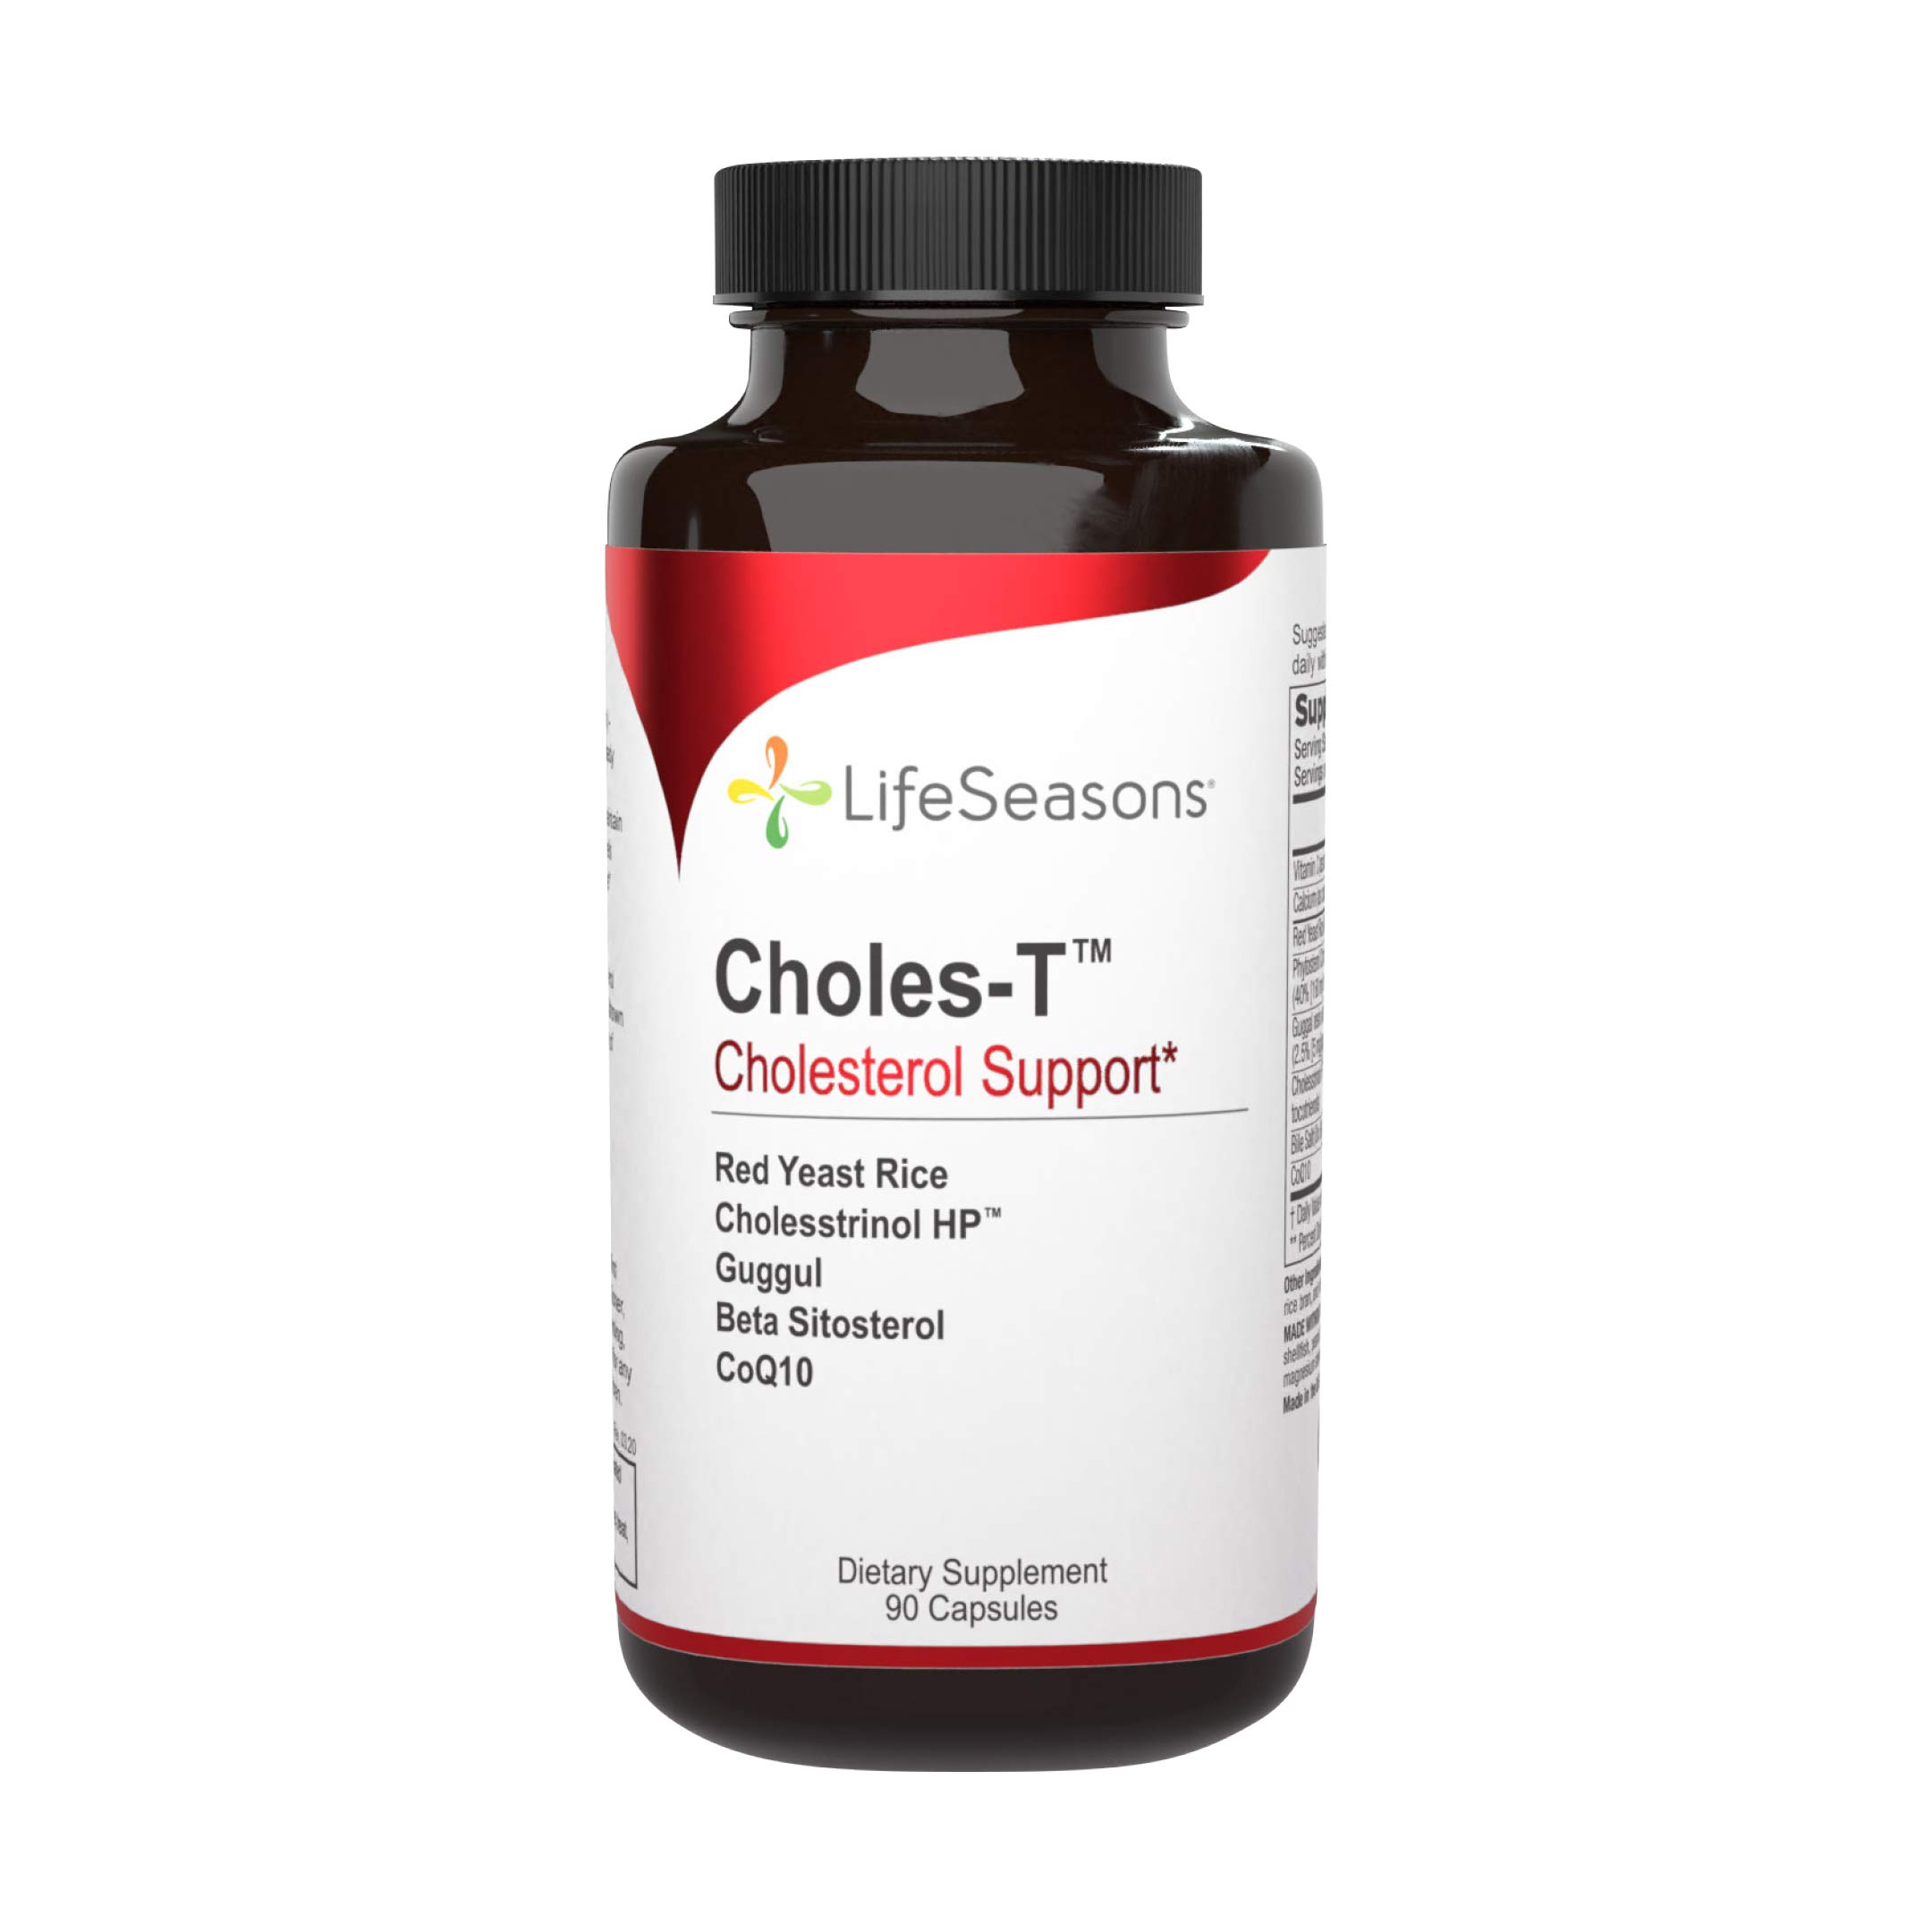 Life Seasons - Choles-T - Natural Cholesterol Support Supplement - Aids in Heart and Liver Health - Contains Red Yeast Rice - 90 Capsules